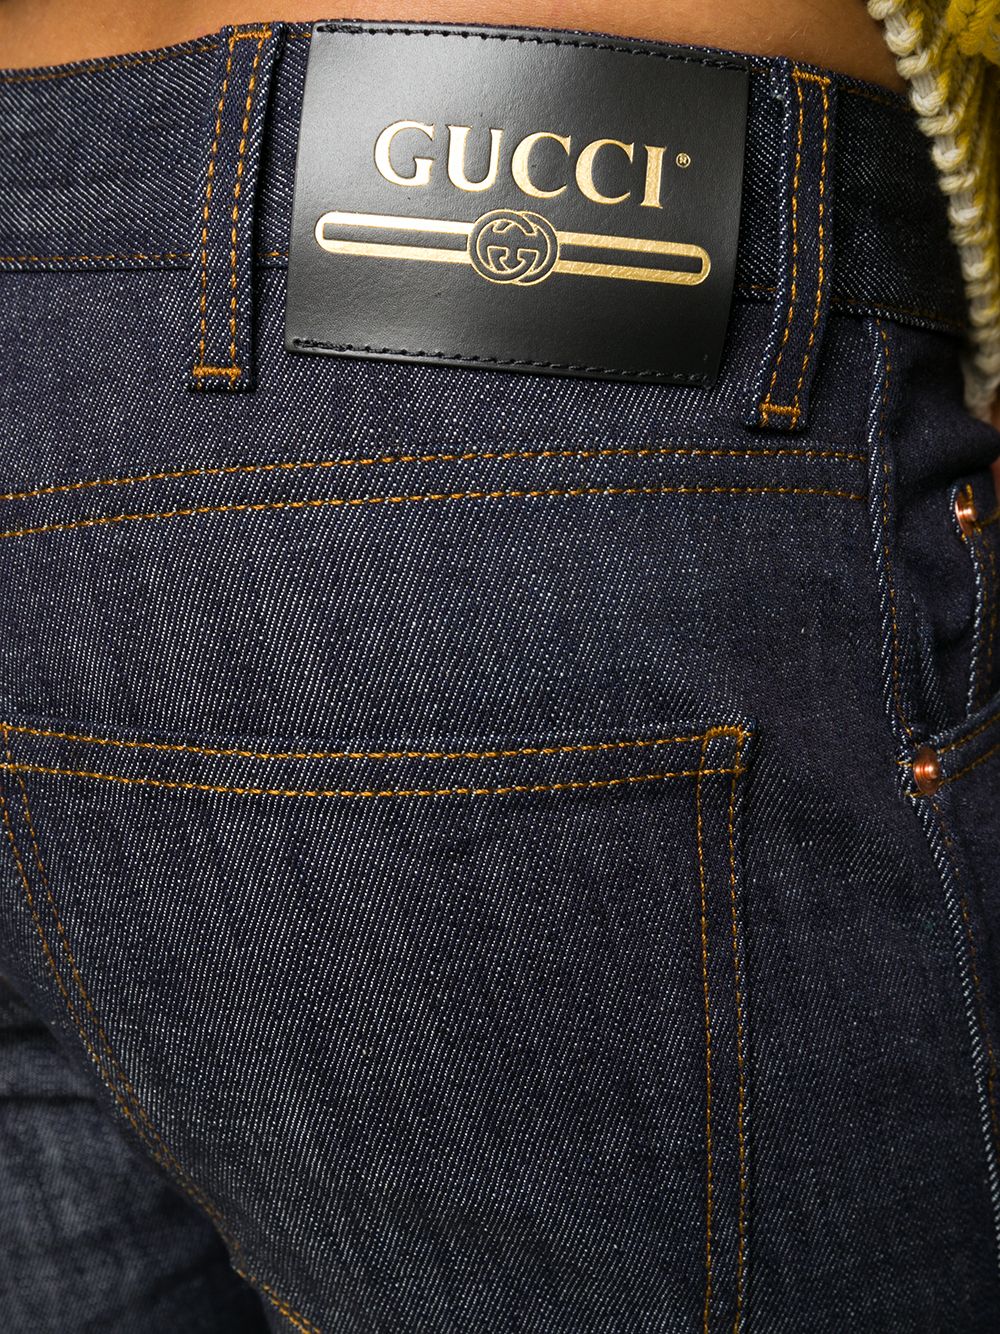 GucciTapered washed Jeans at Fashion Clinic